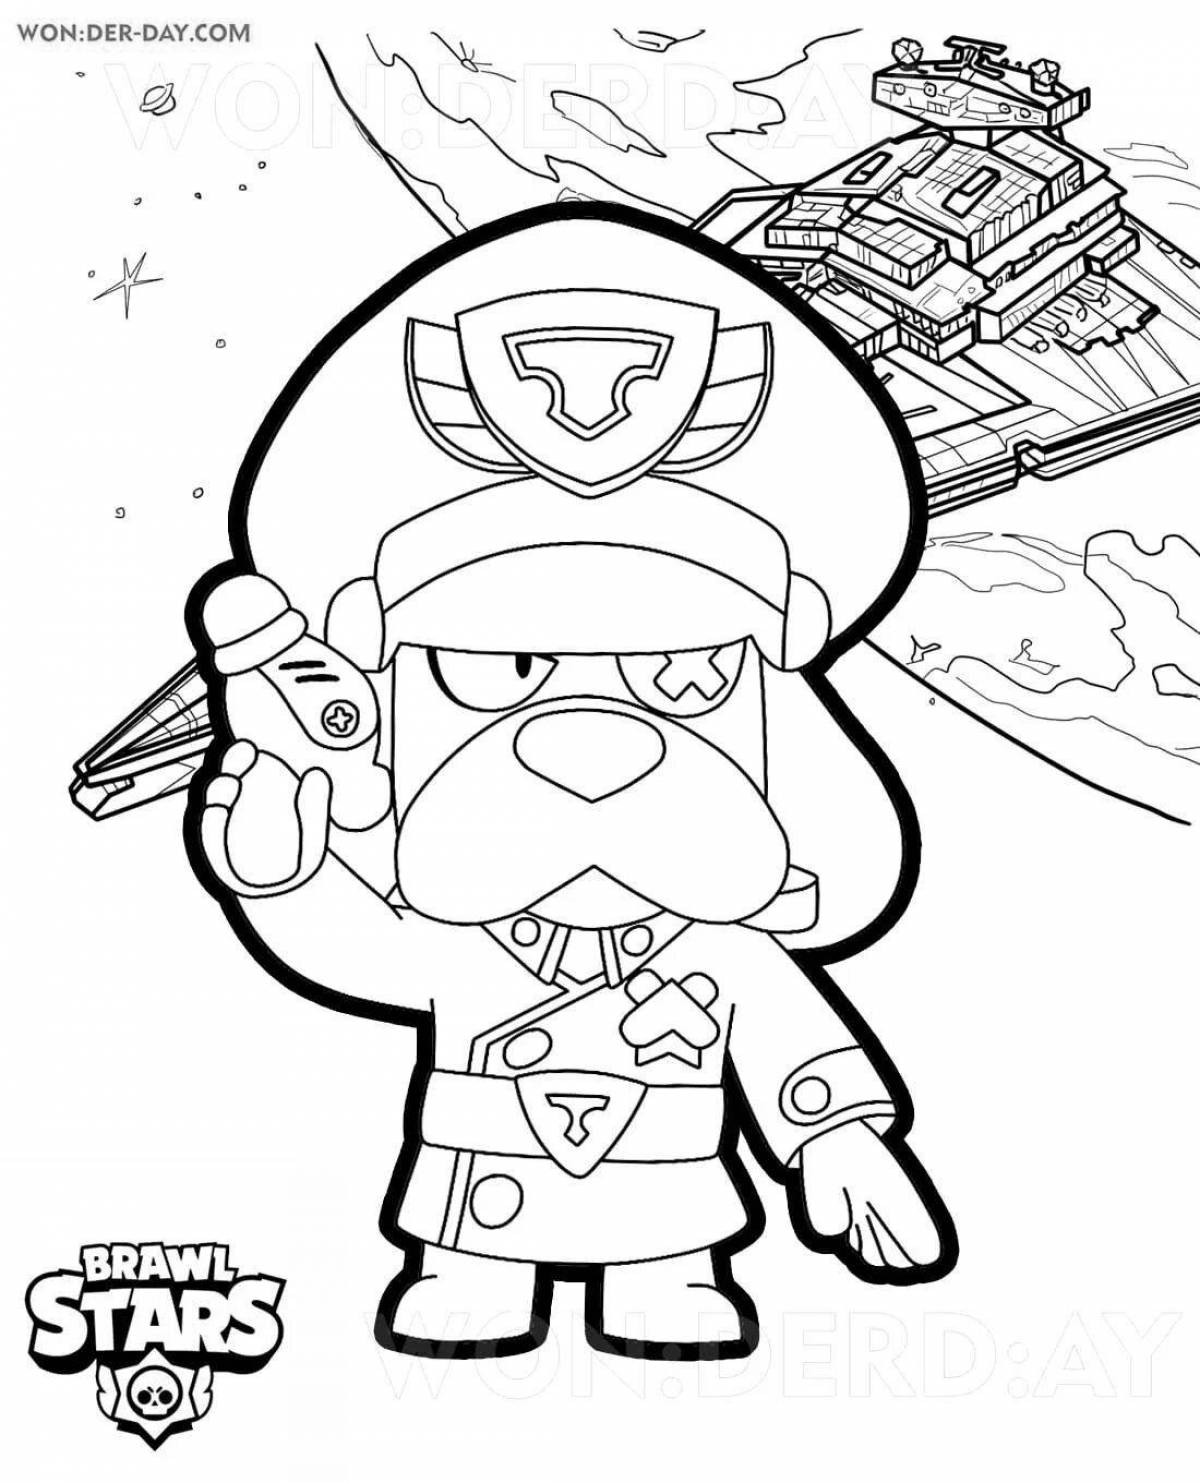 Outgoing gus from brawl stars